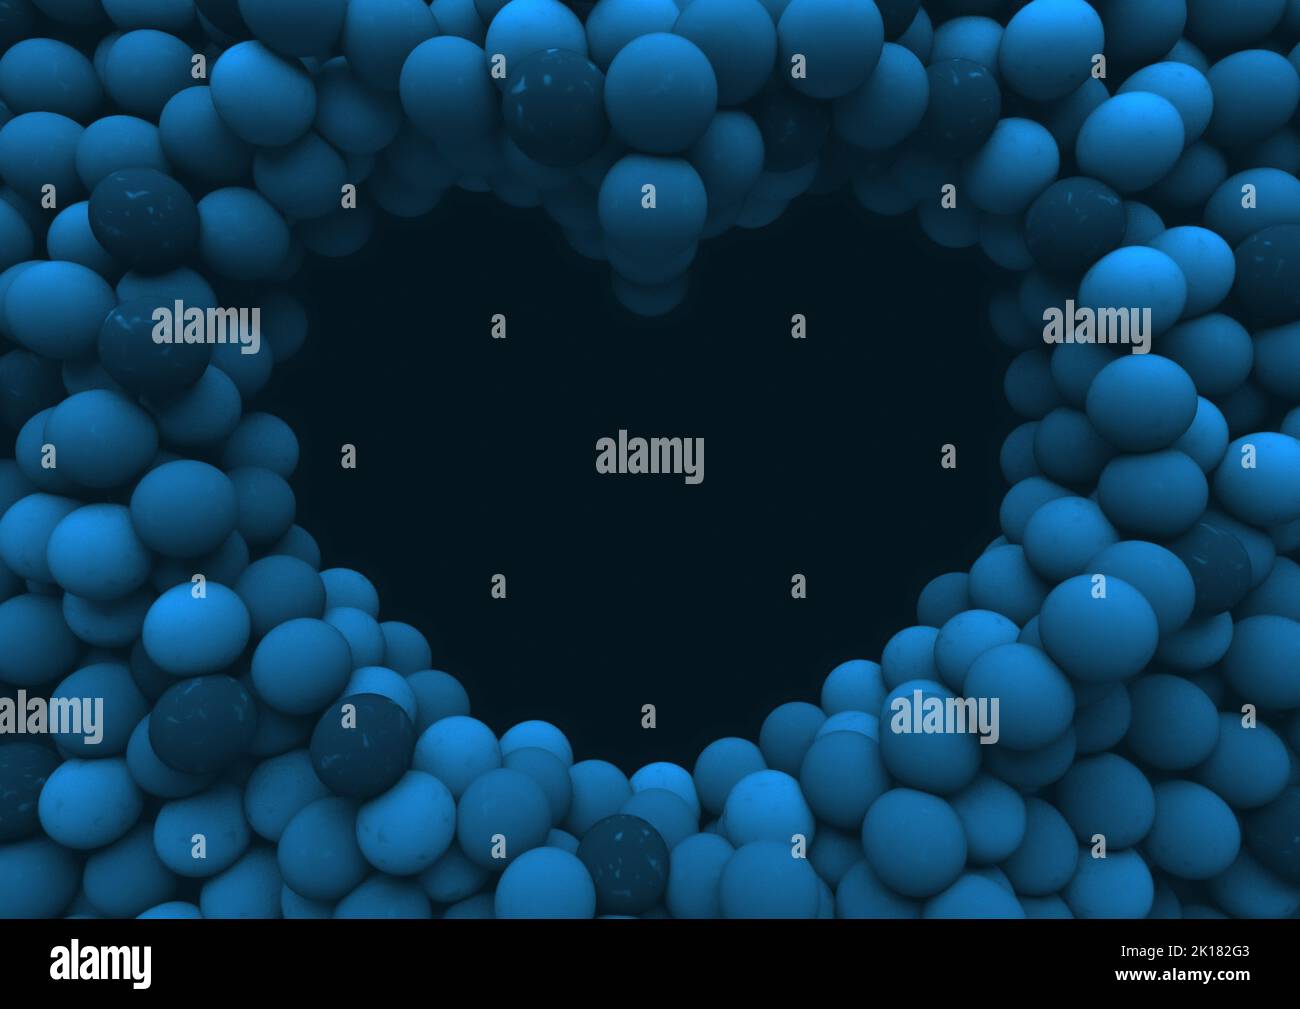 A heart shaped void surrounded by an array of blue rubber balls spread out to form a solid background - 3D render Stock Photo